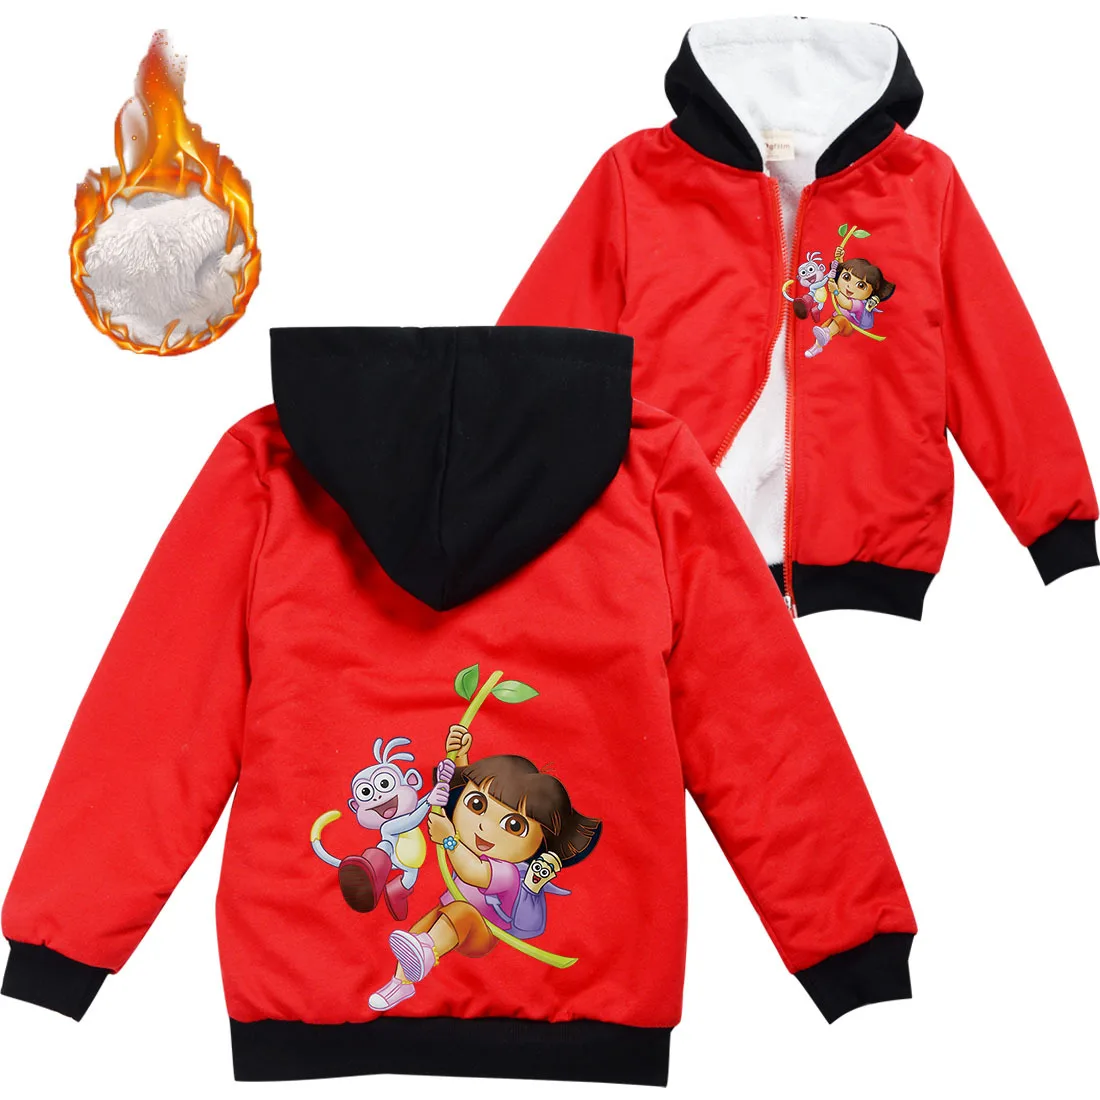 

Dora The Explorer Child Cotton Jacket Zipper Kids Clothing Thickened Coat Winter Clothes for Girls Parkas Little Baby Outerwear